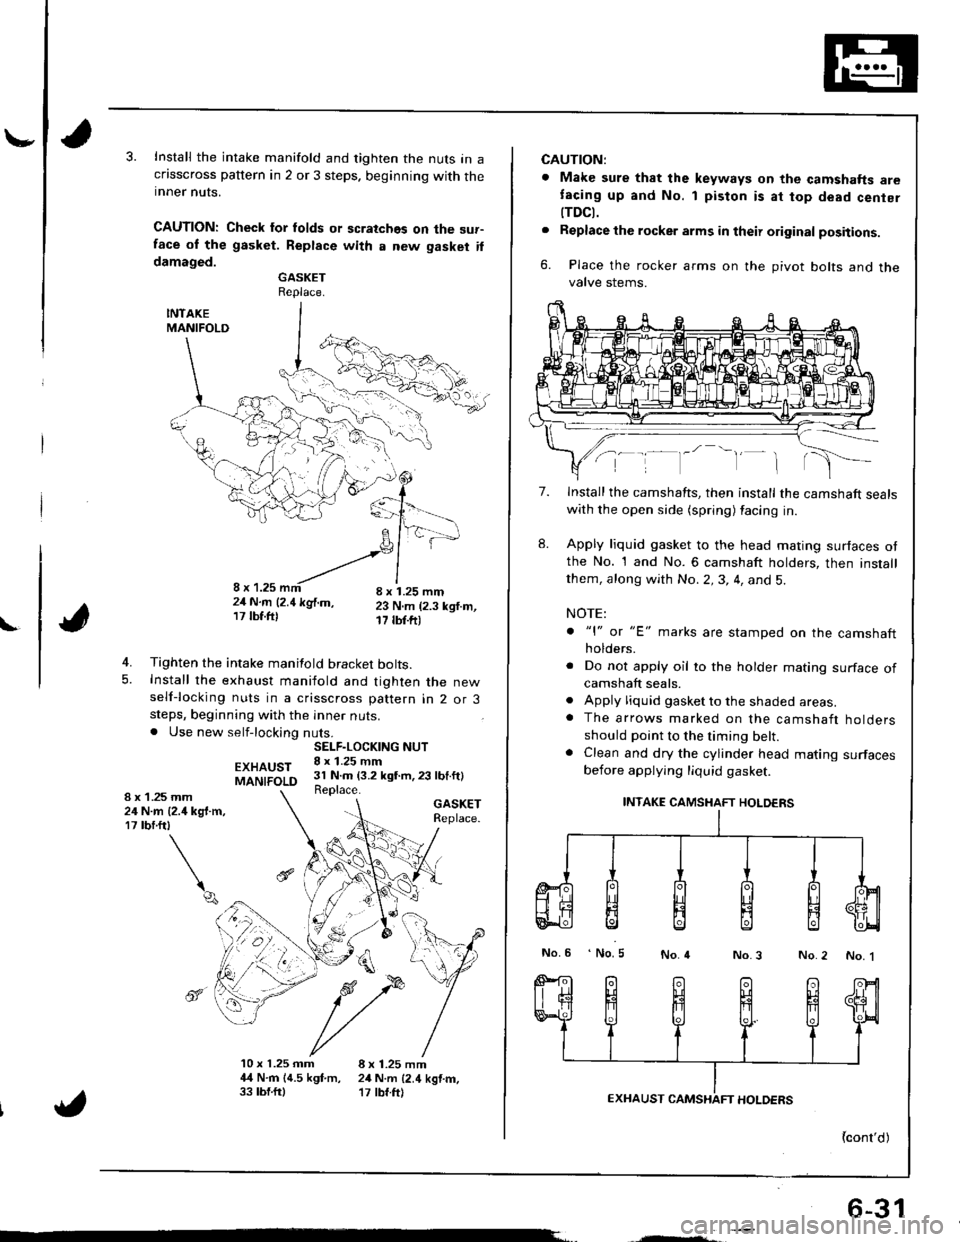 HONDA INTEGRA 1998 4.G Workshop Manual \-
L
Install the intake manifold and tighten the nuts in acflsscross pattern in 2 or 3 steps. beginning with theinner nuts.
CAUTION: Check lor folds or scratches on the sur-face ol the gasket. Replace